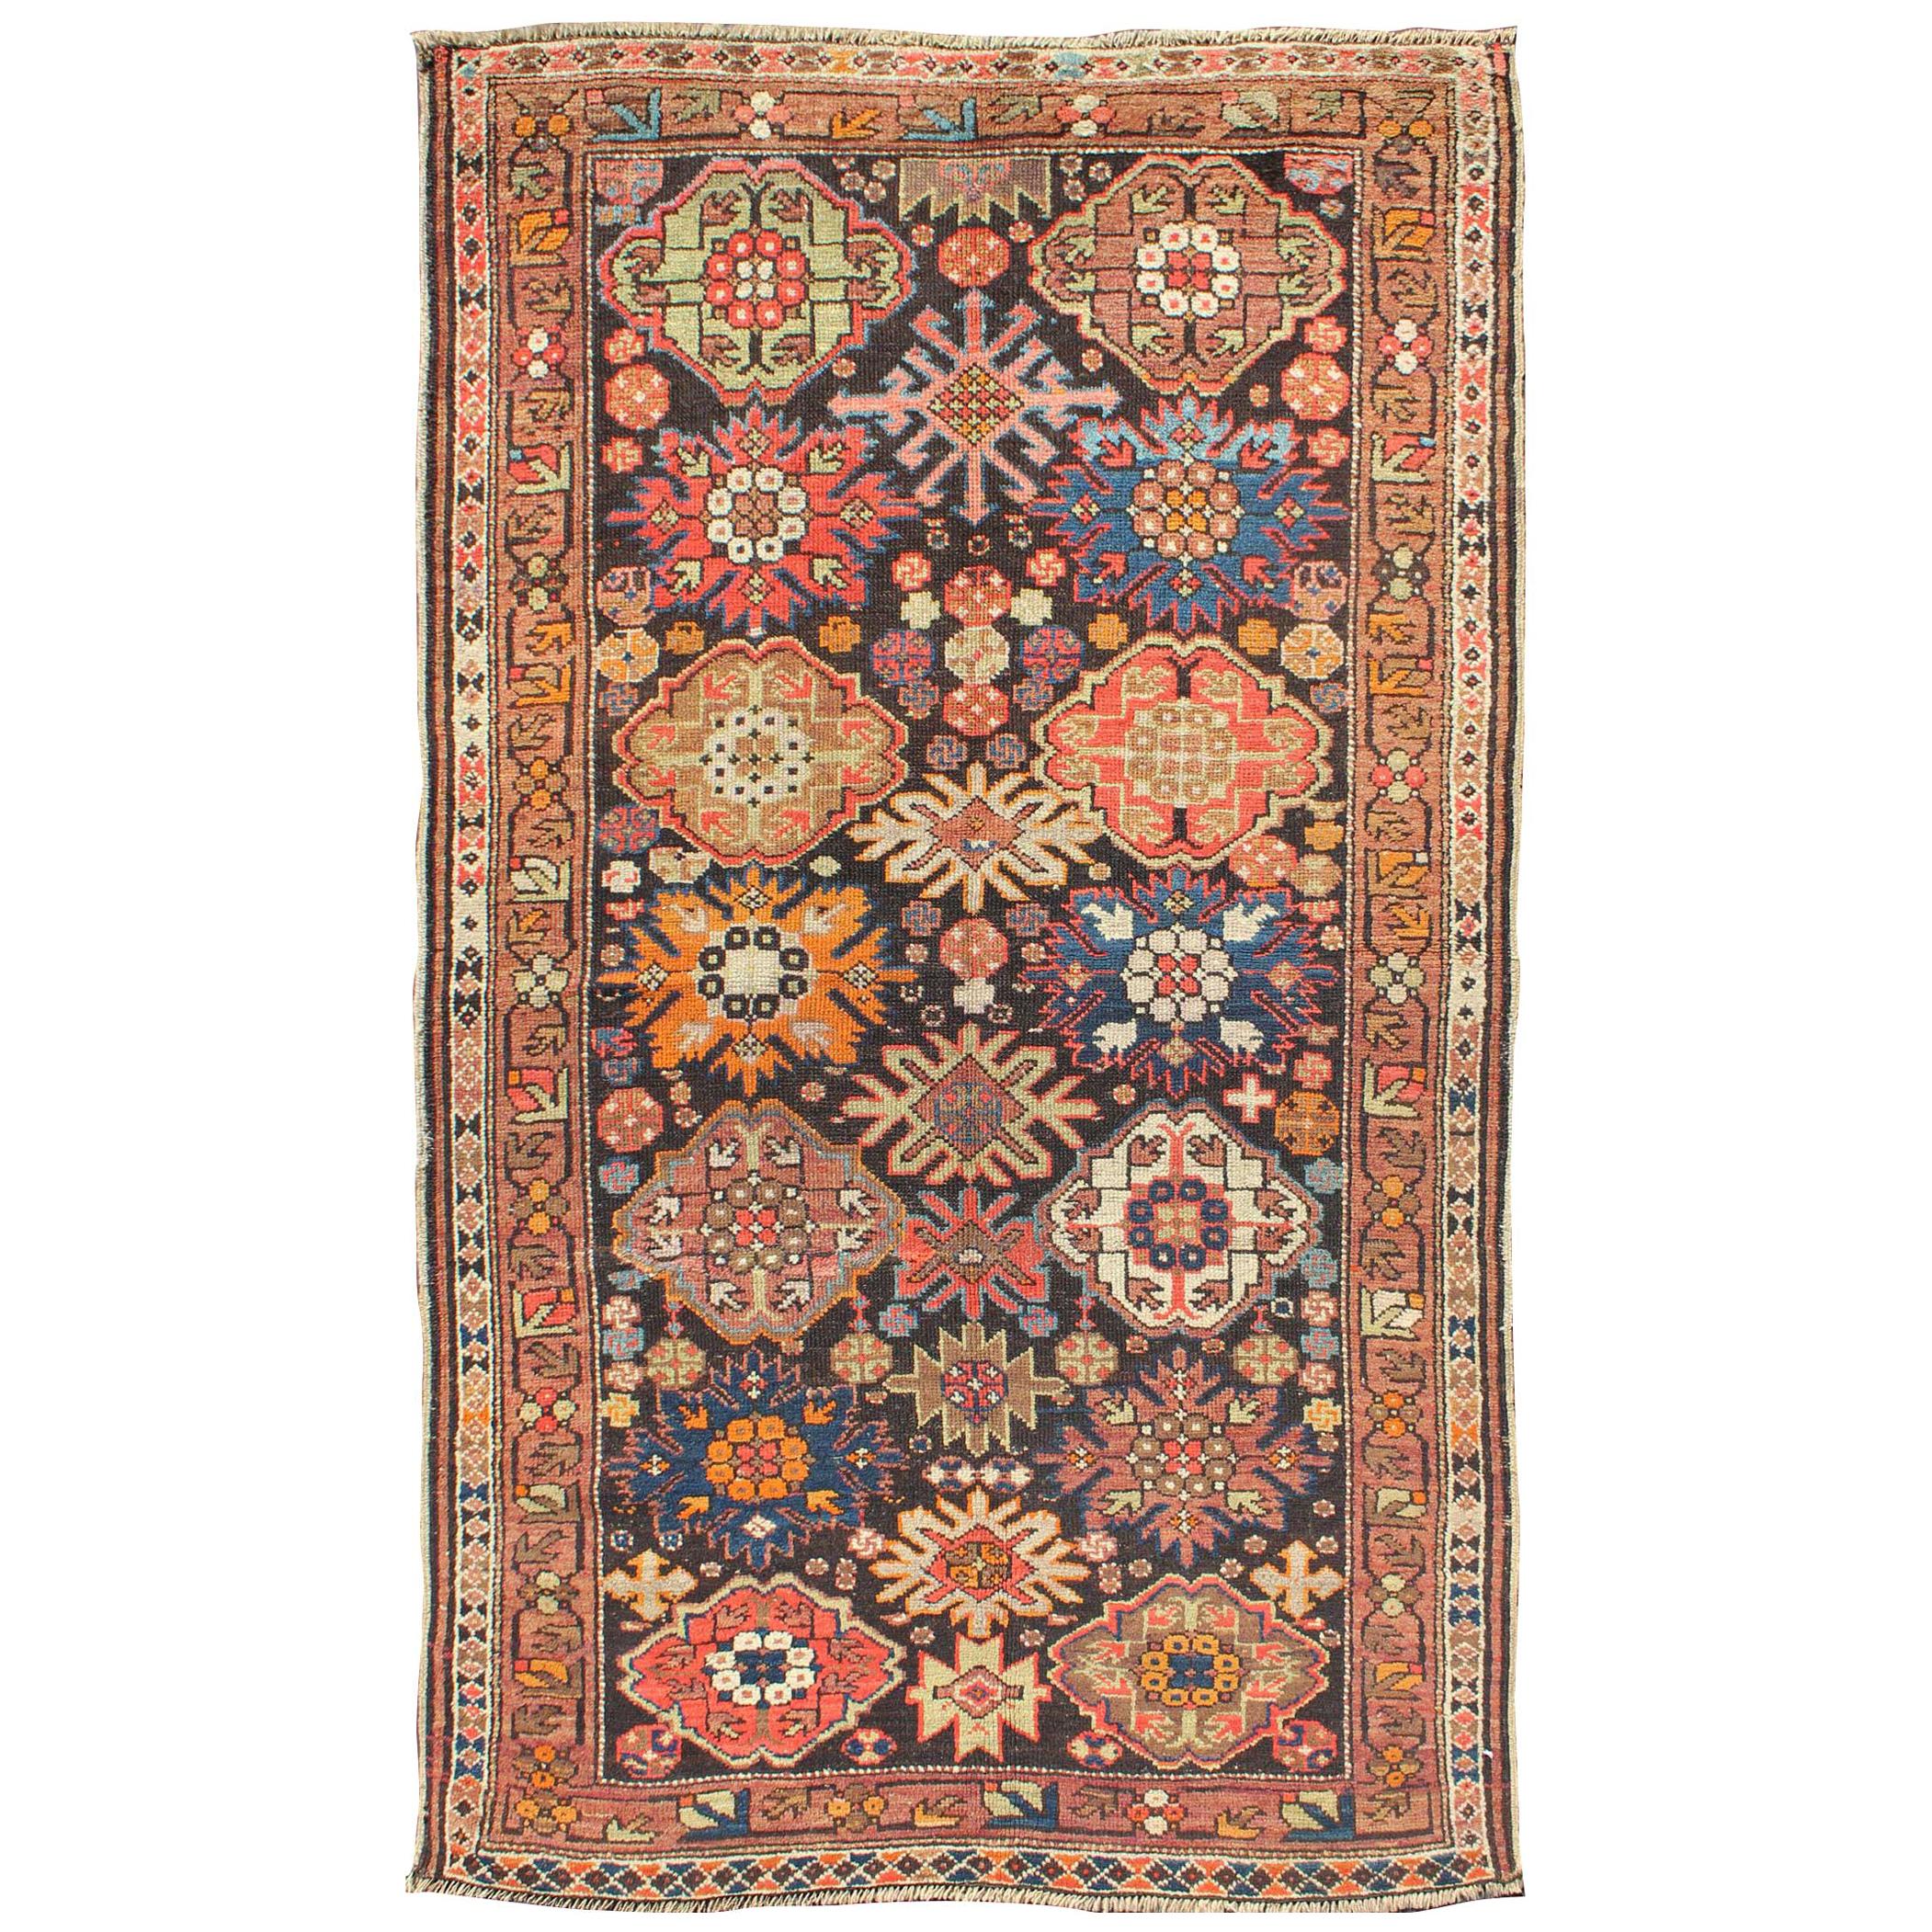 Antique Caucasian Rug with All-Over Multi-Colored in Large All Over Pattern